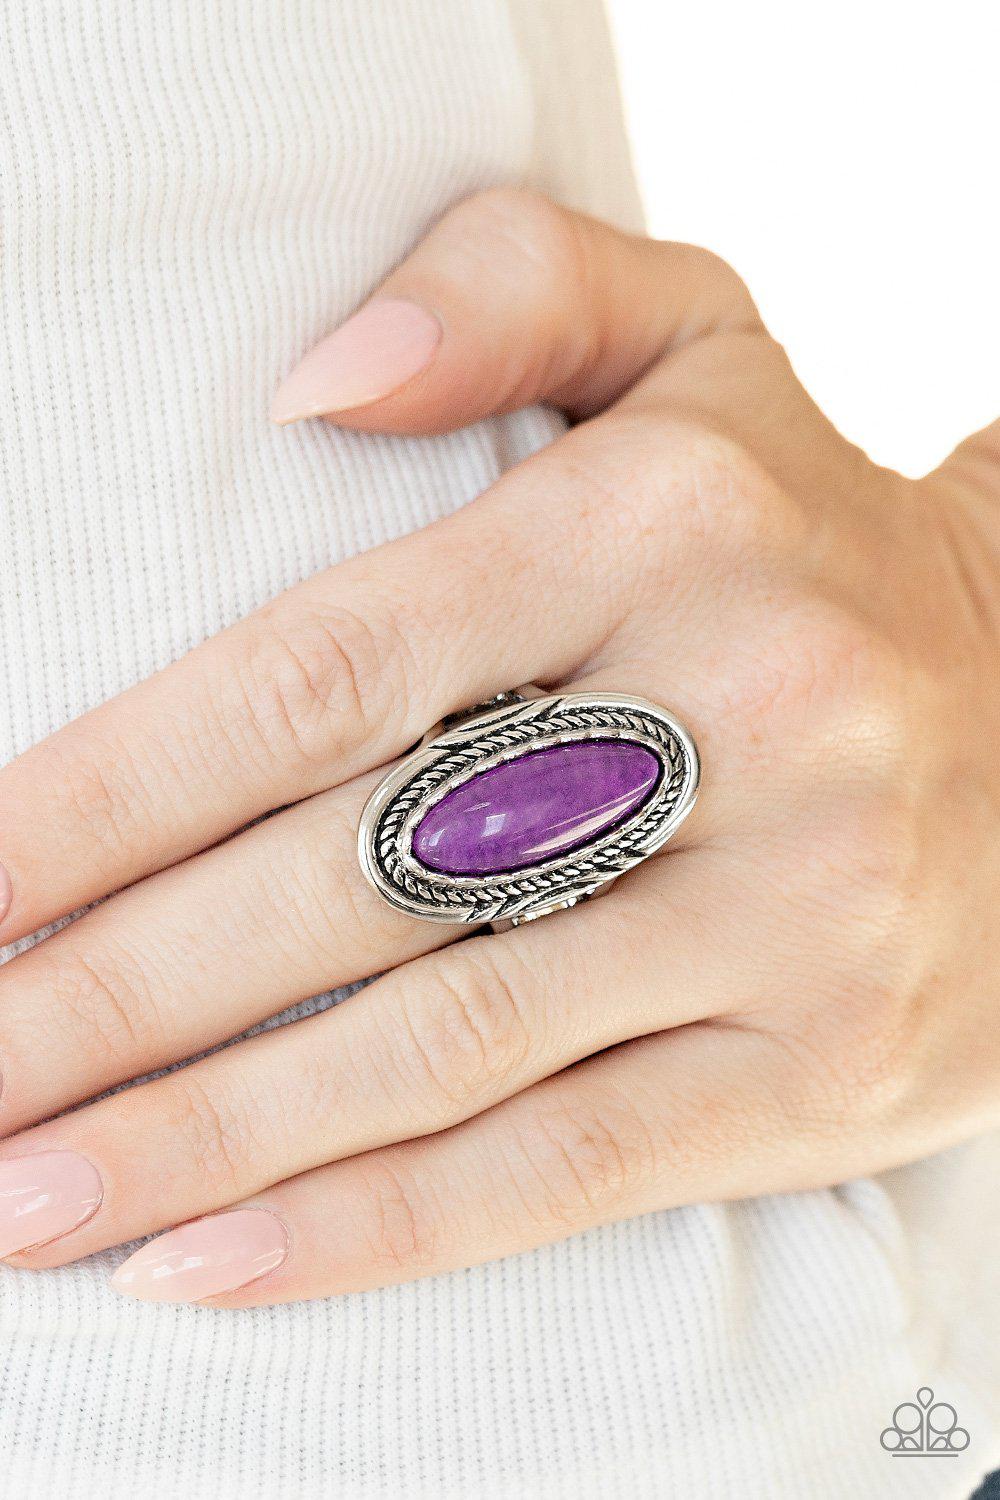 Primal Instincts Purple Stone Ring - Paparazzi Accessories- model - CarasShop.com - $5 Jewelry by Cara Jewels